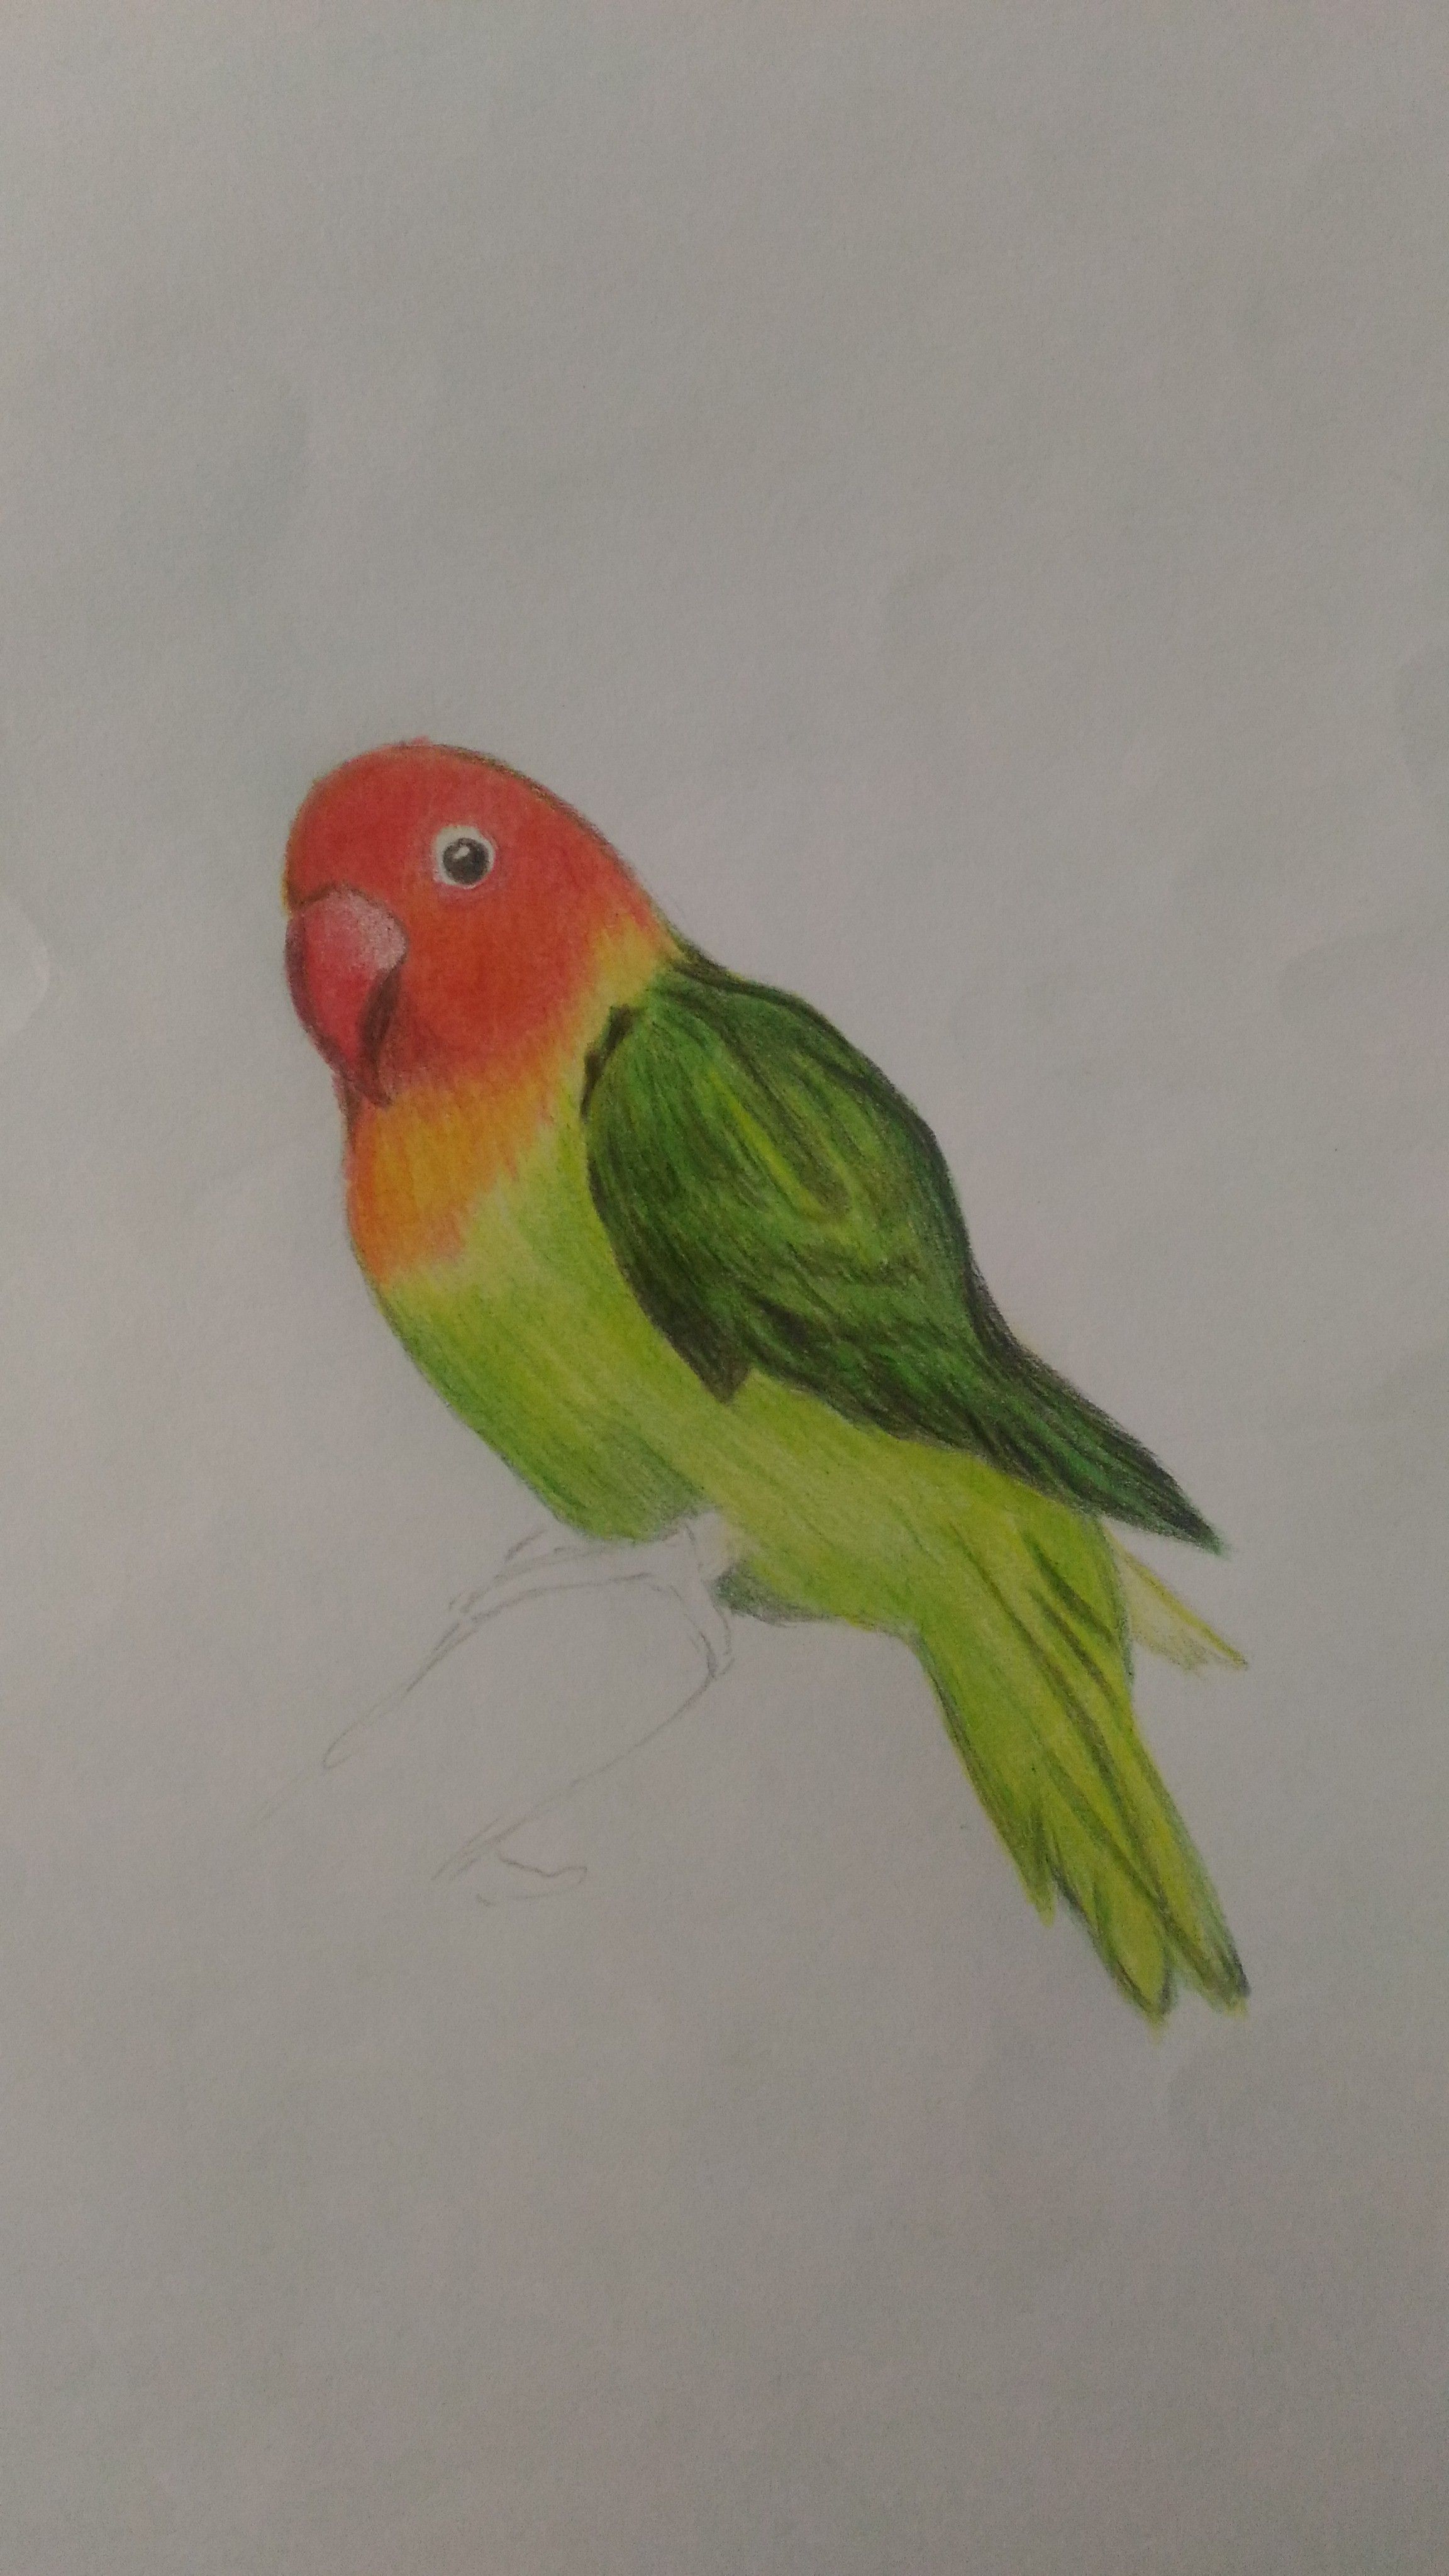 How to Draw a Parrot | Easy Parrot Drawing | Simple Parrot Sketch | Parrot  drawing, Drawings, Alphabet drawing